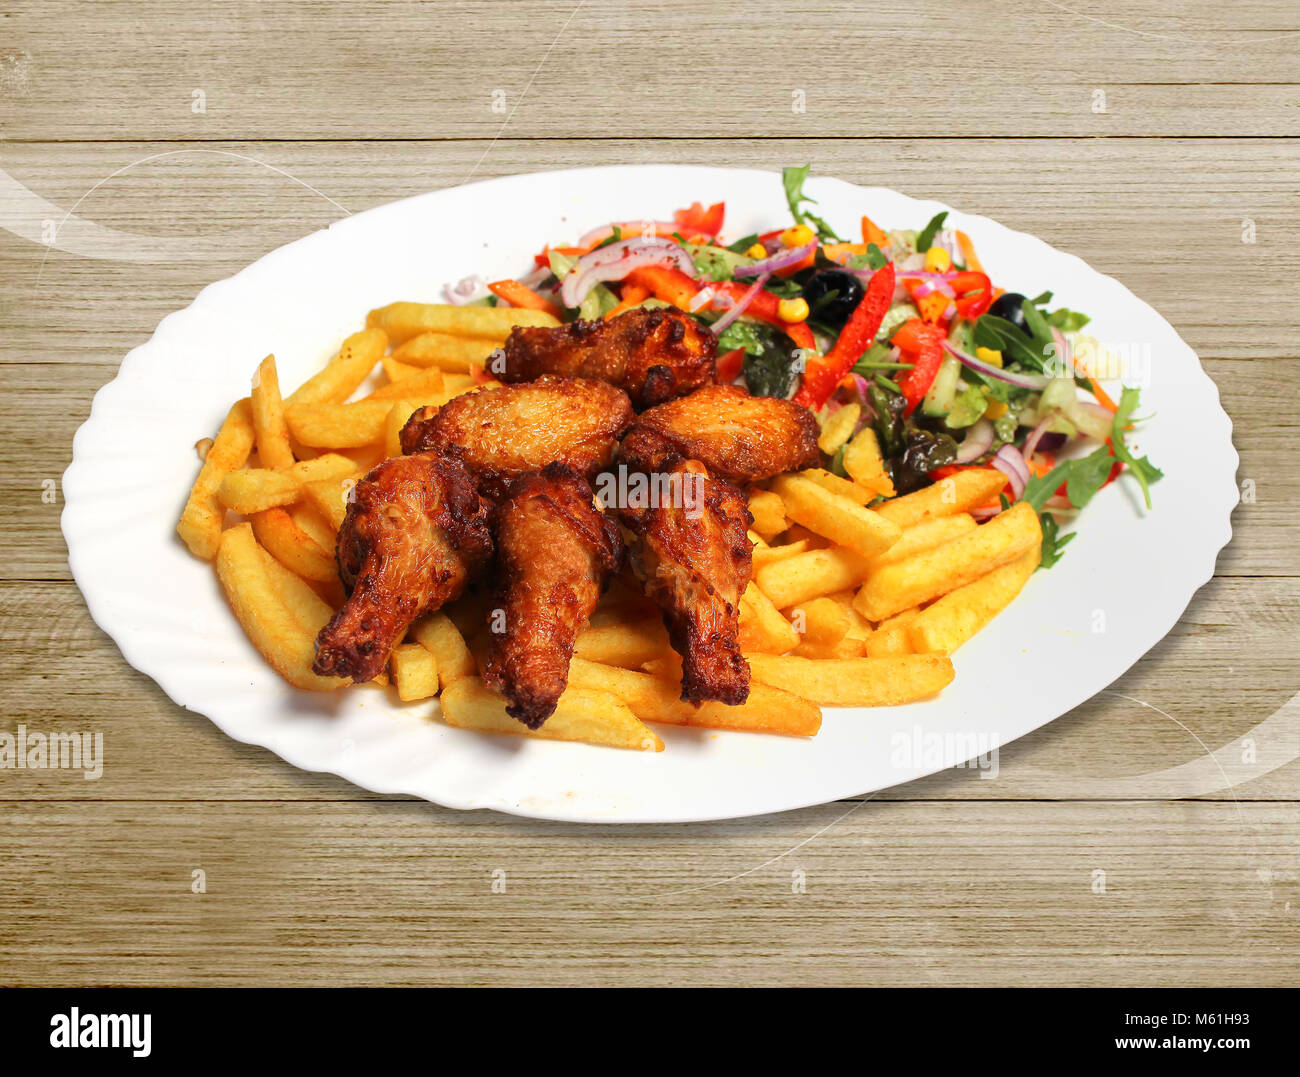 Chickennuggets with Pommes and salad in plate, Fastfood Stock Photo